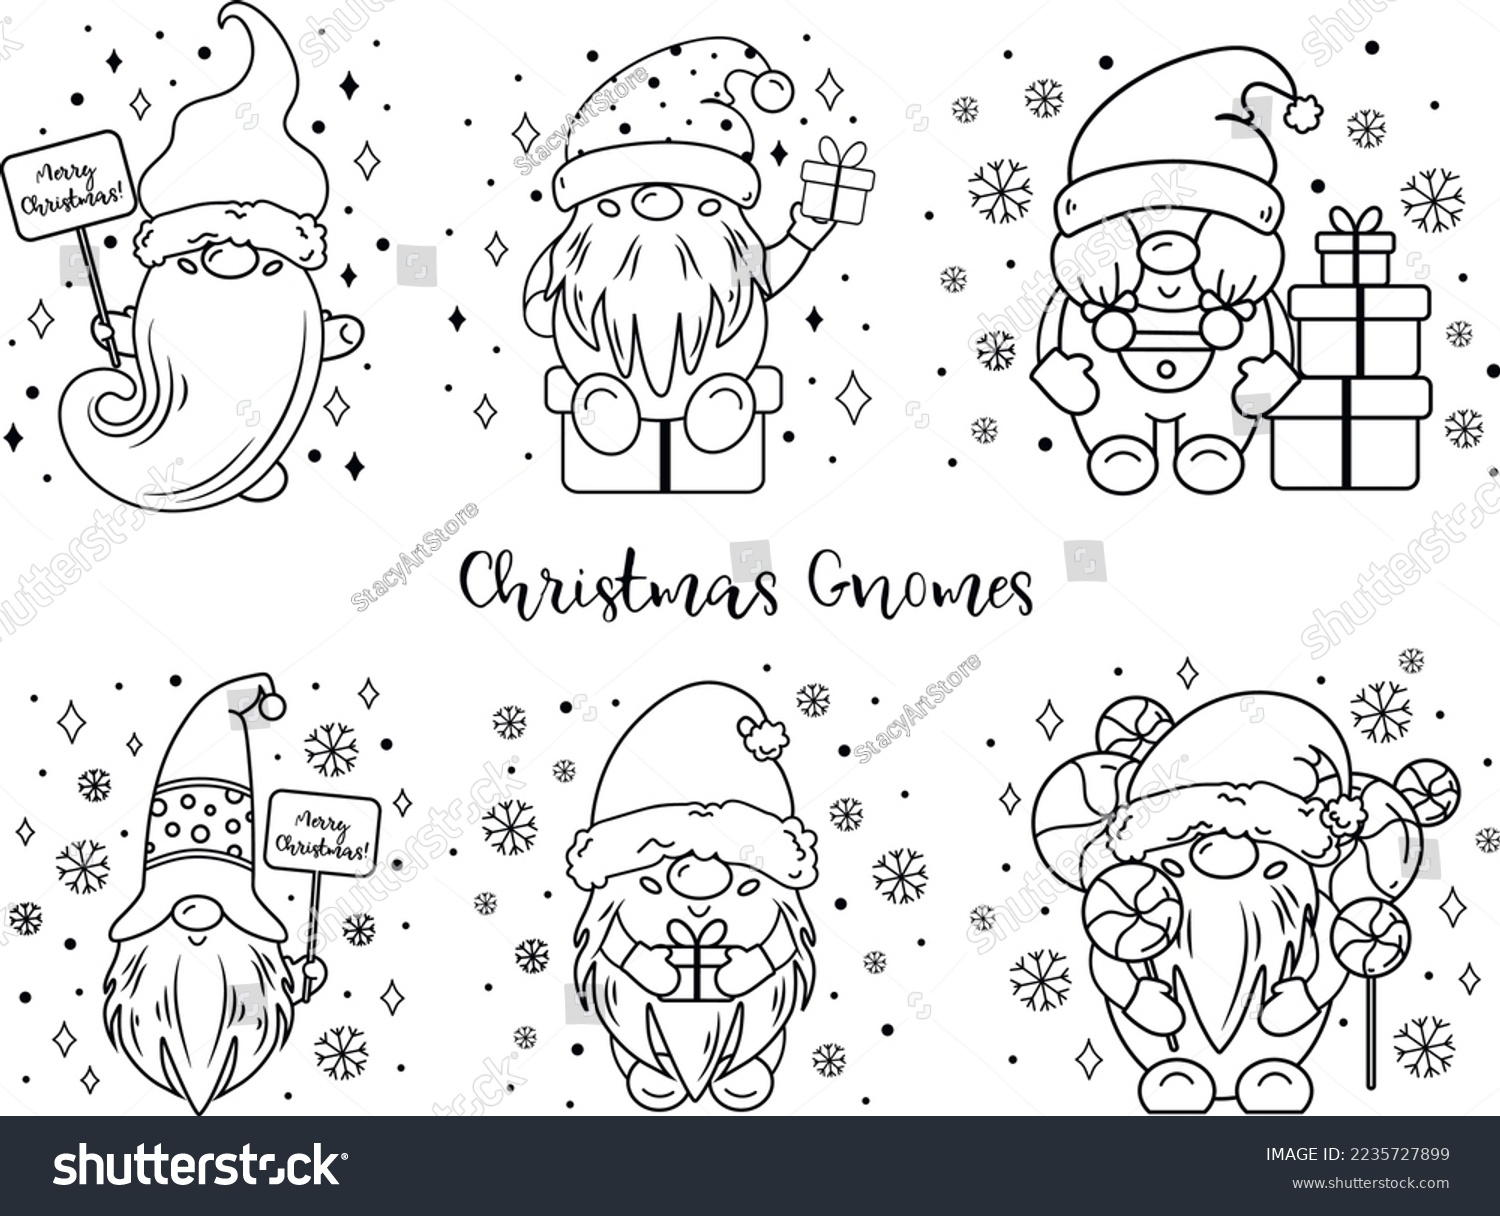 SVG of Hand Drawn Vector Christmas Gnome SVG Illustration Set Isolated on White. Happy New Year Composition Perfect for Cut Designs, Cutting Boards, T-shirt, Printing, Greetings and other Craft Designs svg